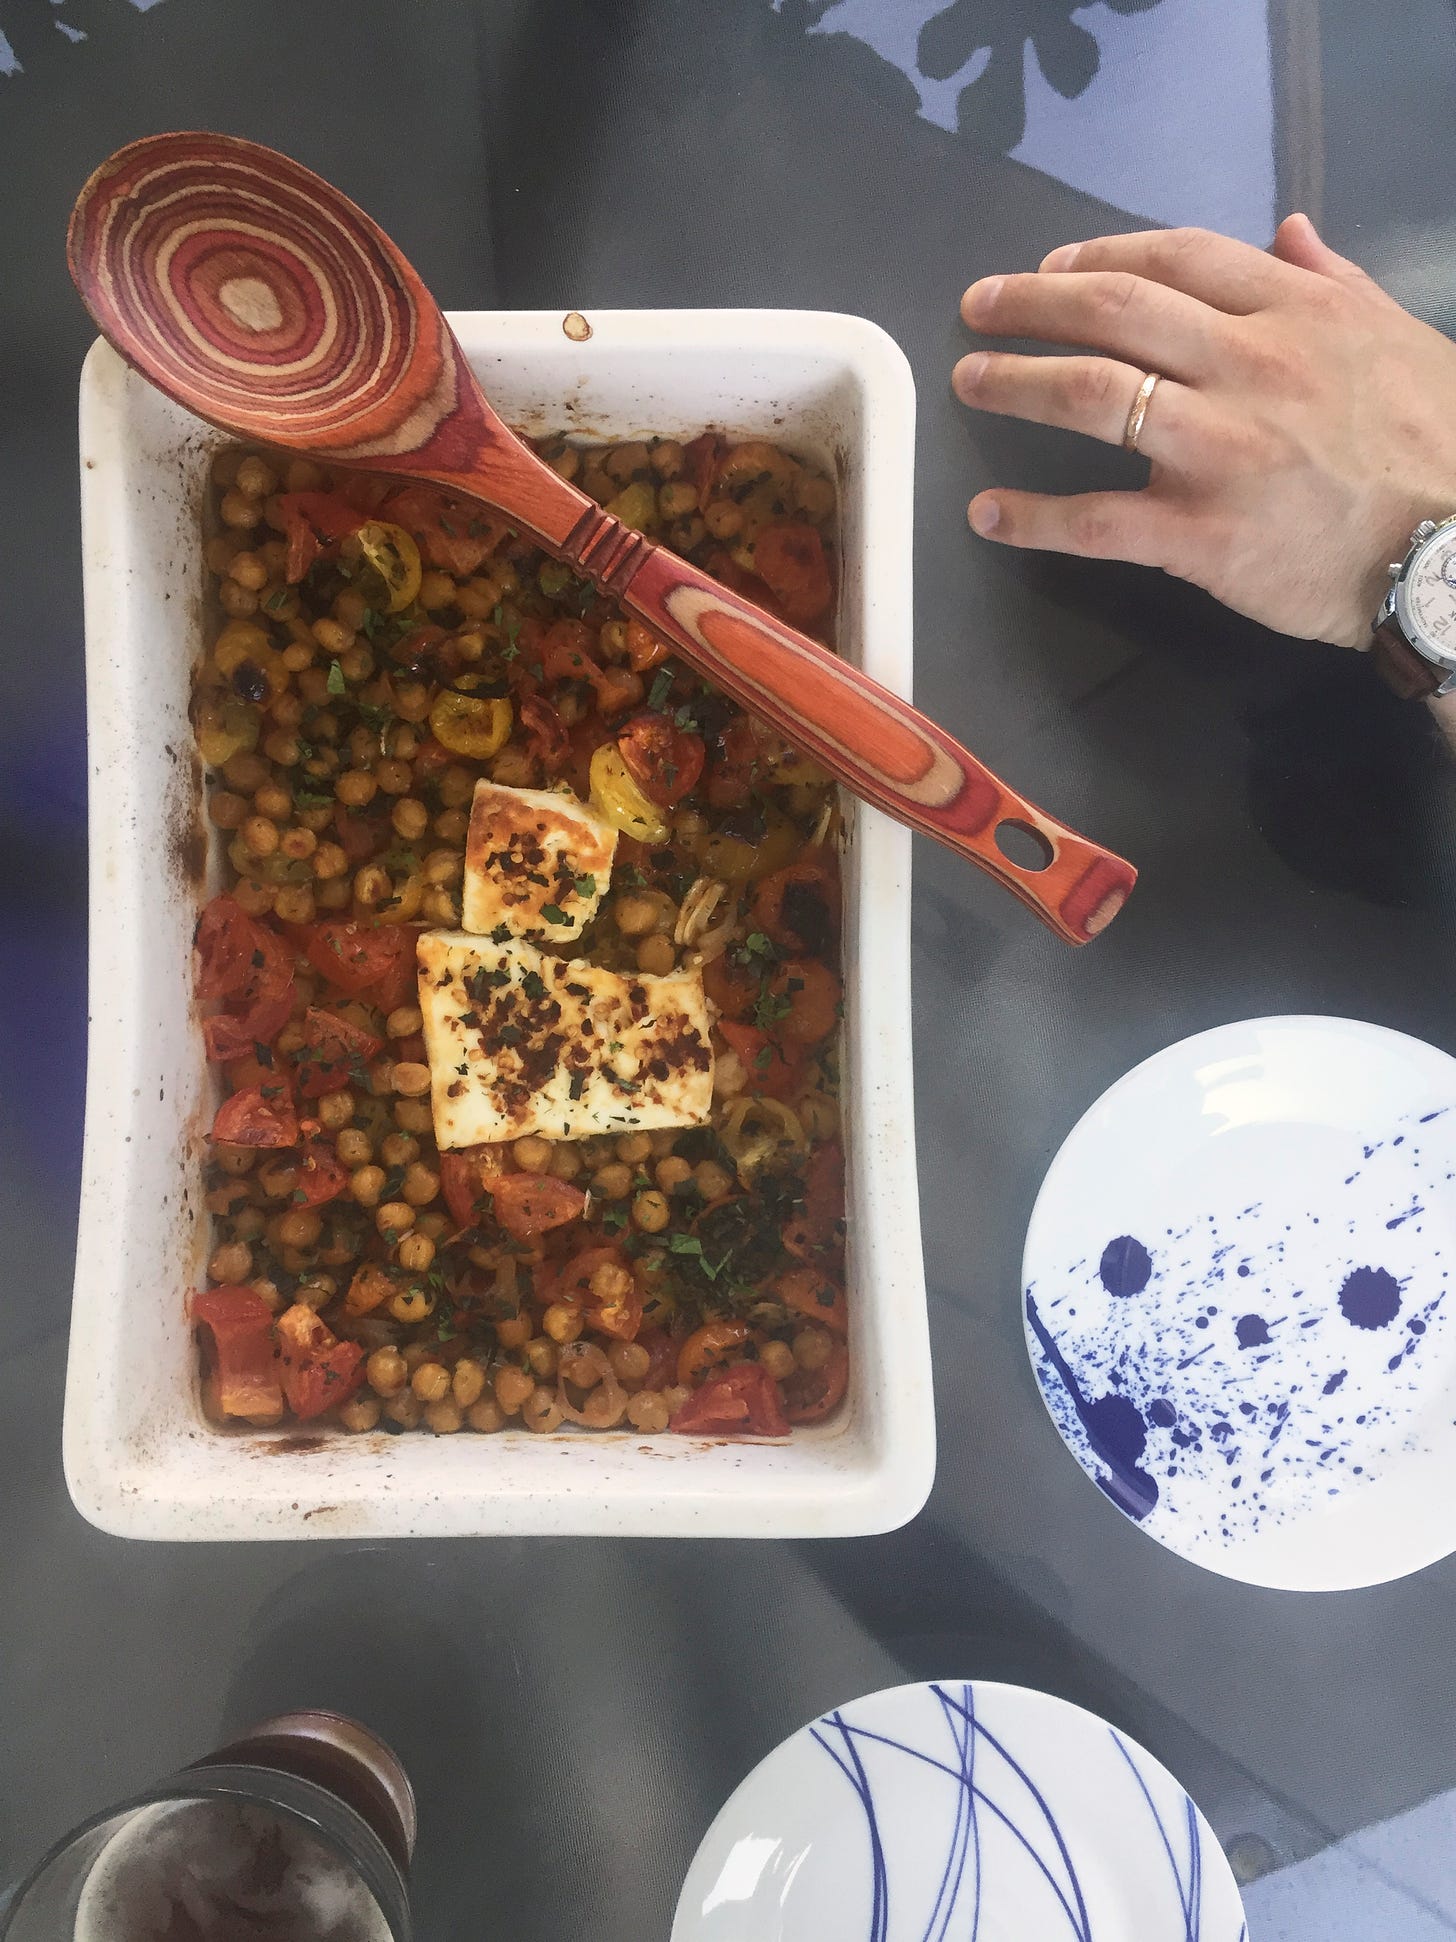 A white rectangular baking dish full of chickpeas and roasted tomatoes, with large pieces of feta covered in chili flakes at the centre. Herbs are sprinkled over the top and a wooden spoon sits crosswise at the top edge of the dish. Next to it on the table are two small plates, and Jeff's hand is just visible at the edge of the frame.